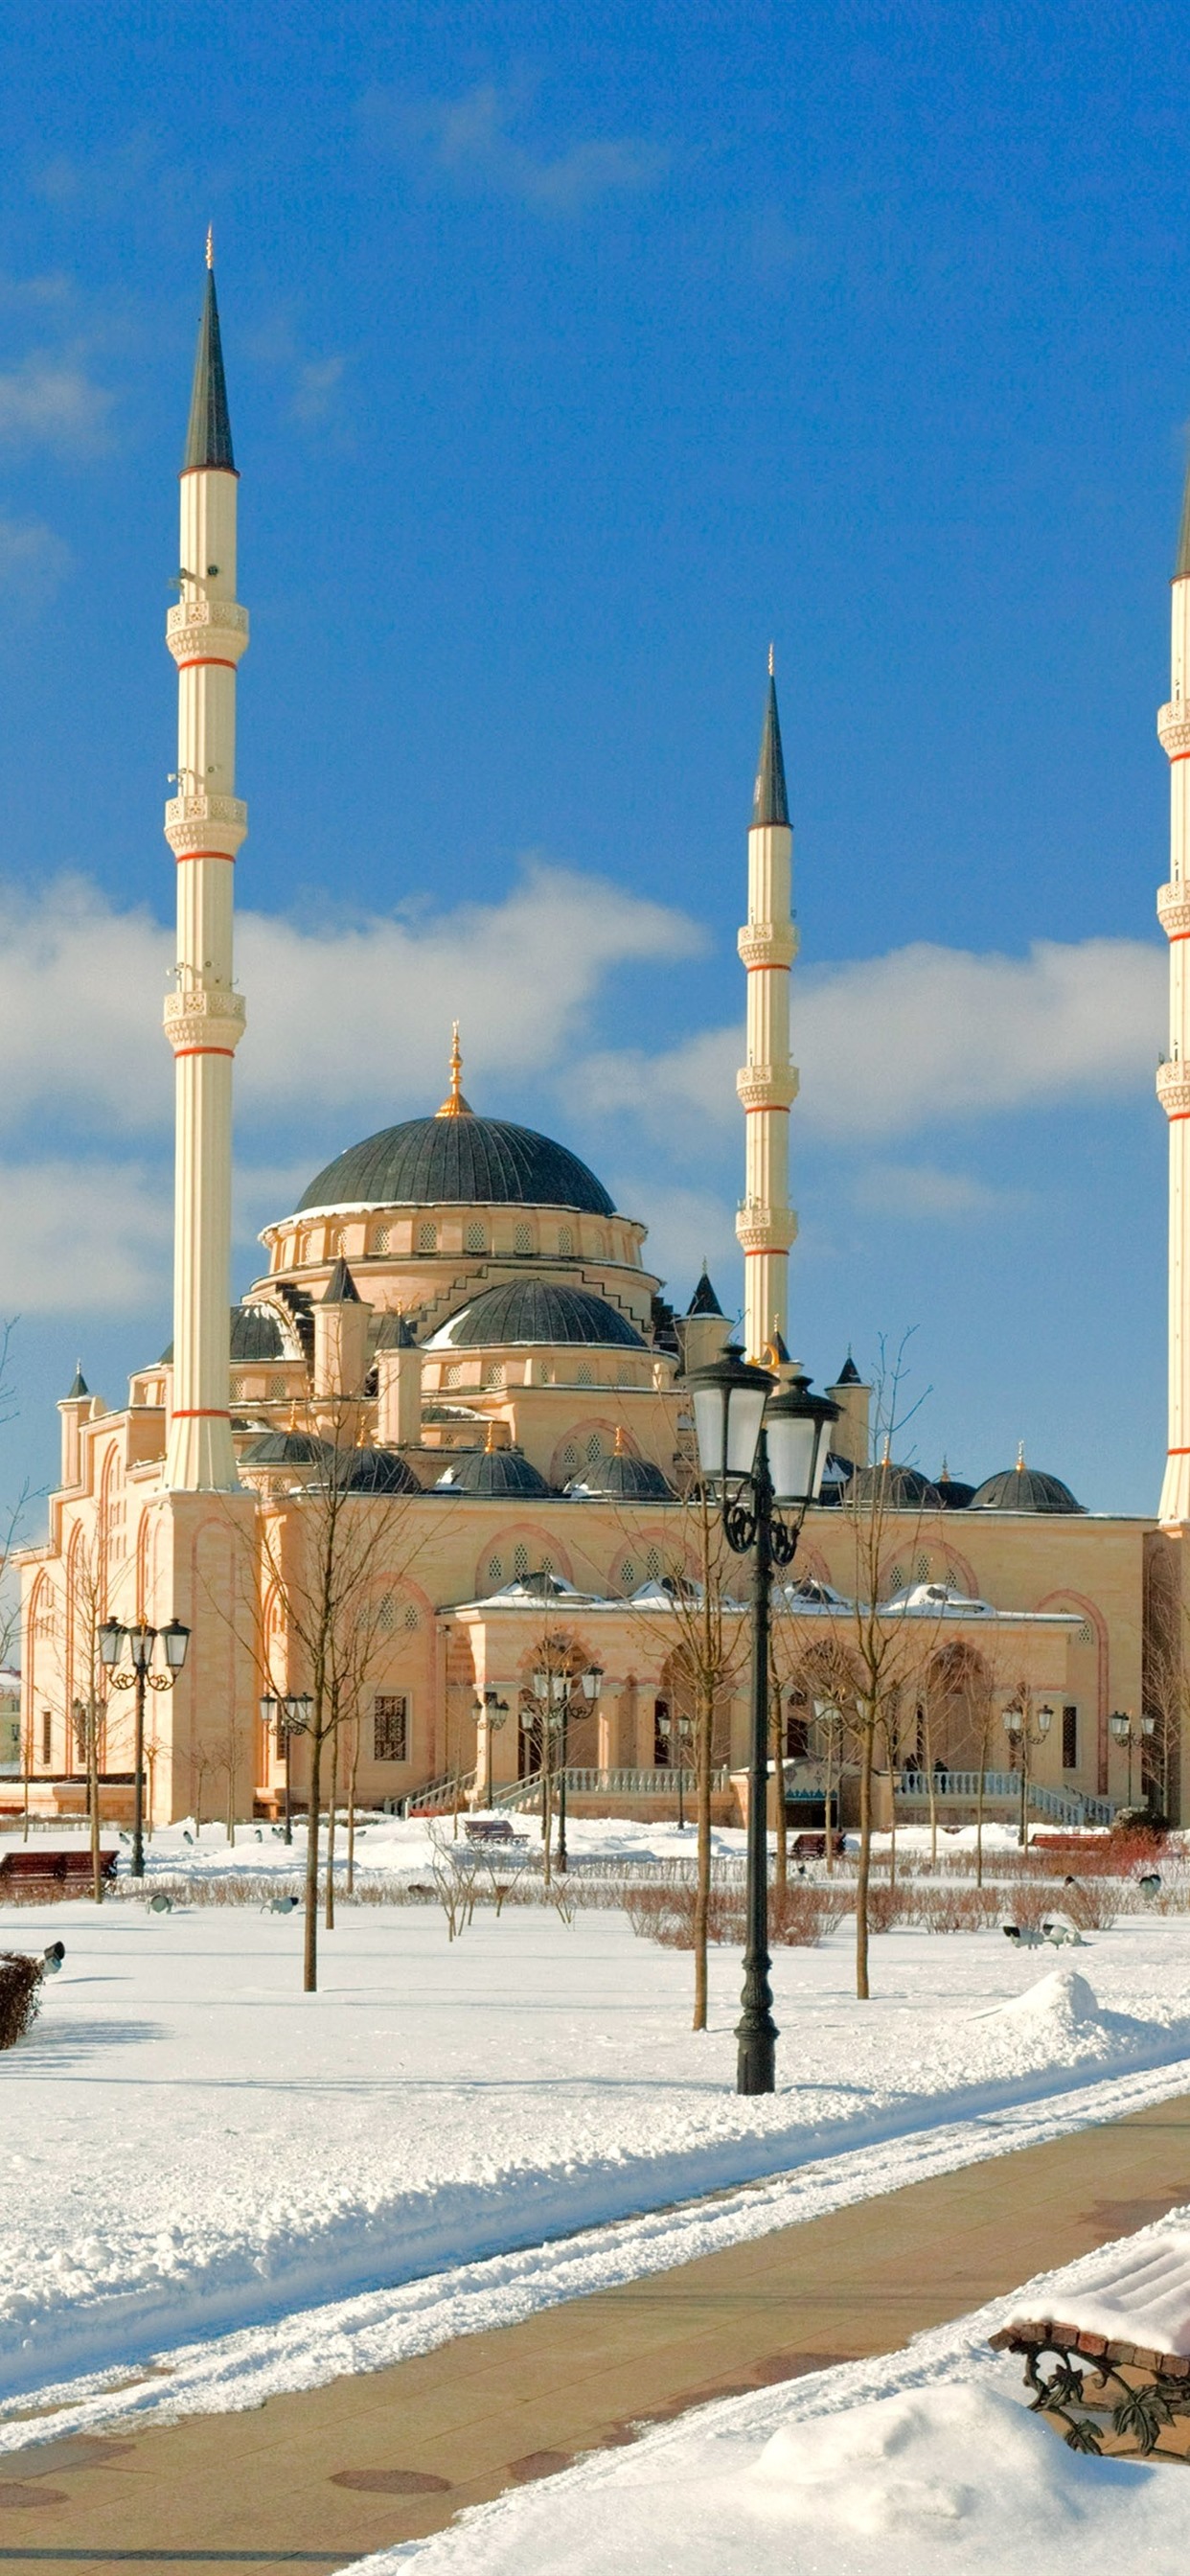 Chechnya, Mosque, Snow, Winter, City 1242x2688 IPhone 11 Pro XS Max Wallpaper, Background, Picture, Image